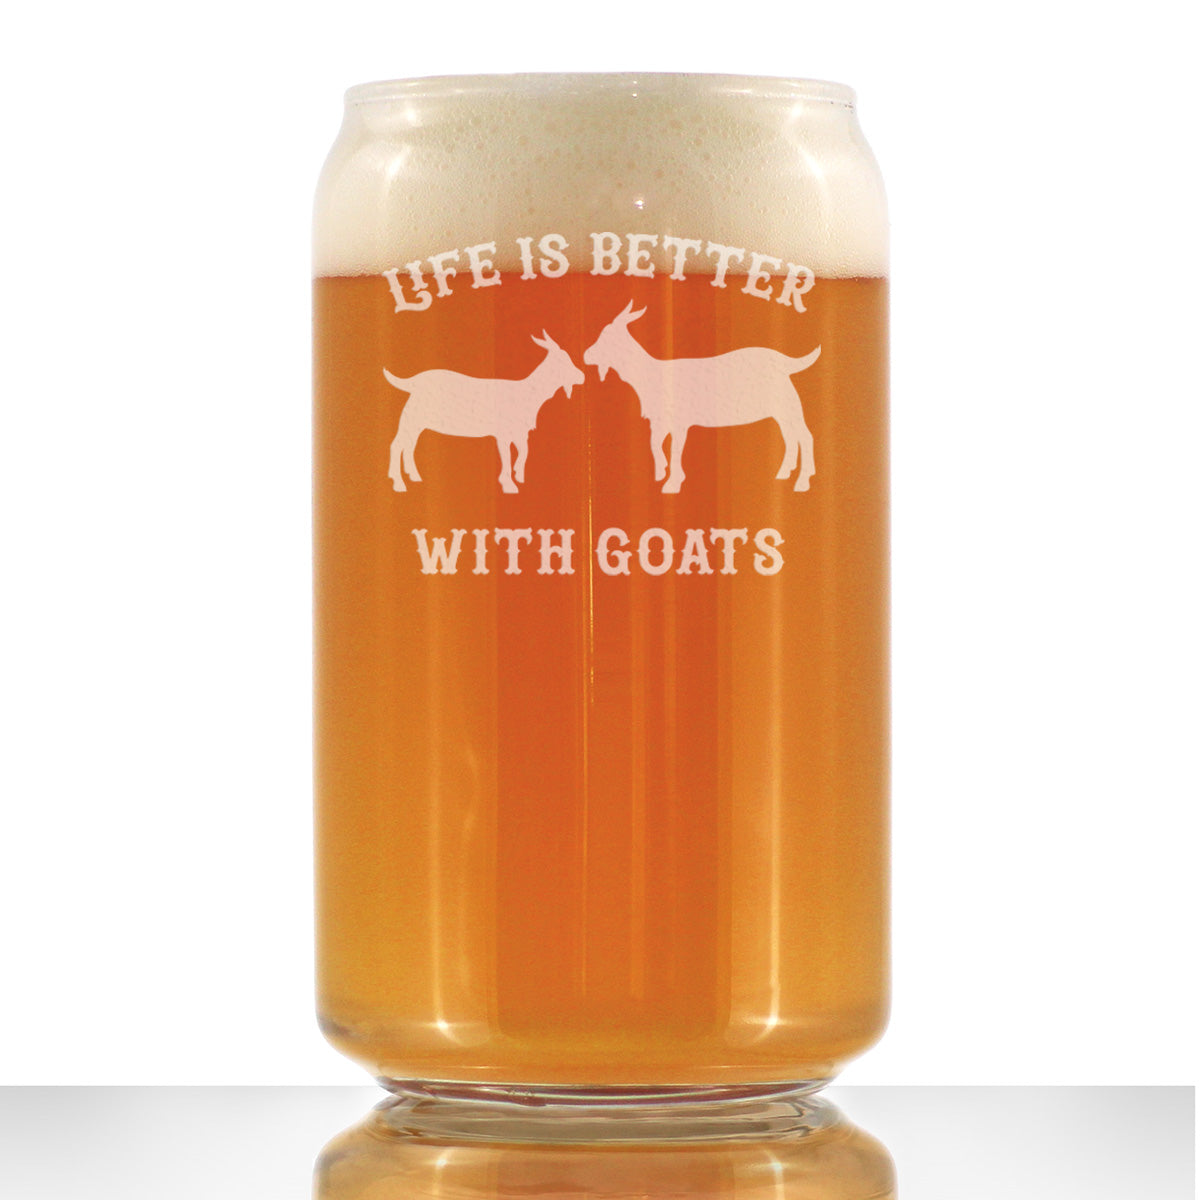 Life is Better With Goats - Goat Beer Can Pint Glass - Unique Funny Farm Animal Themed Decor and Gifts - 16 Oz